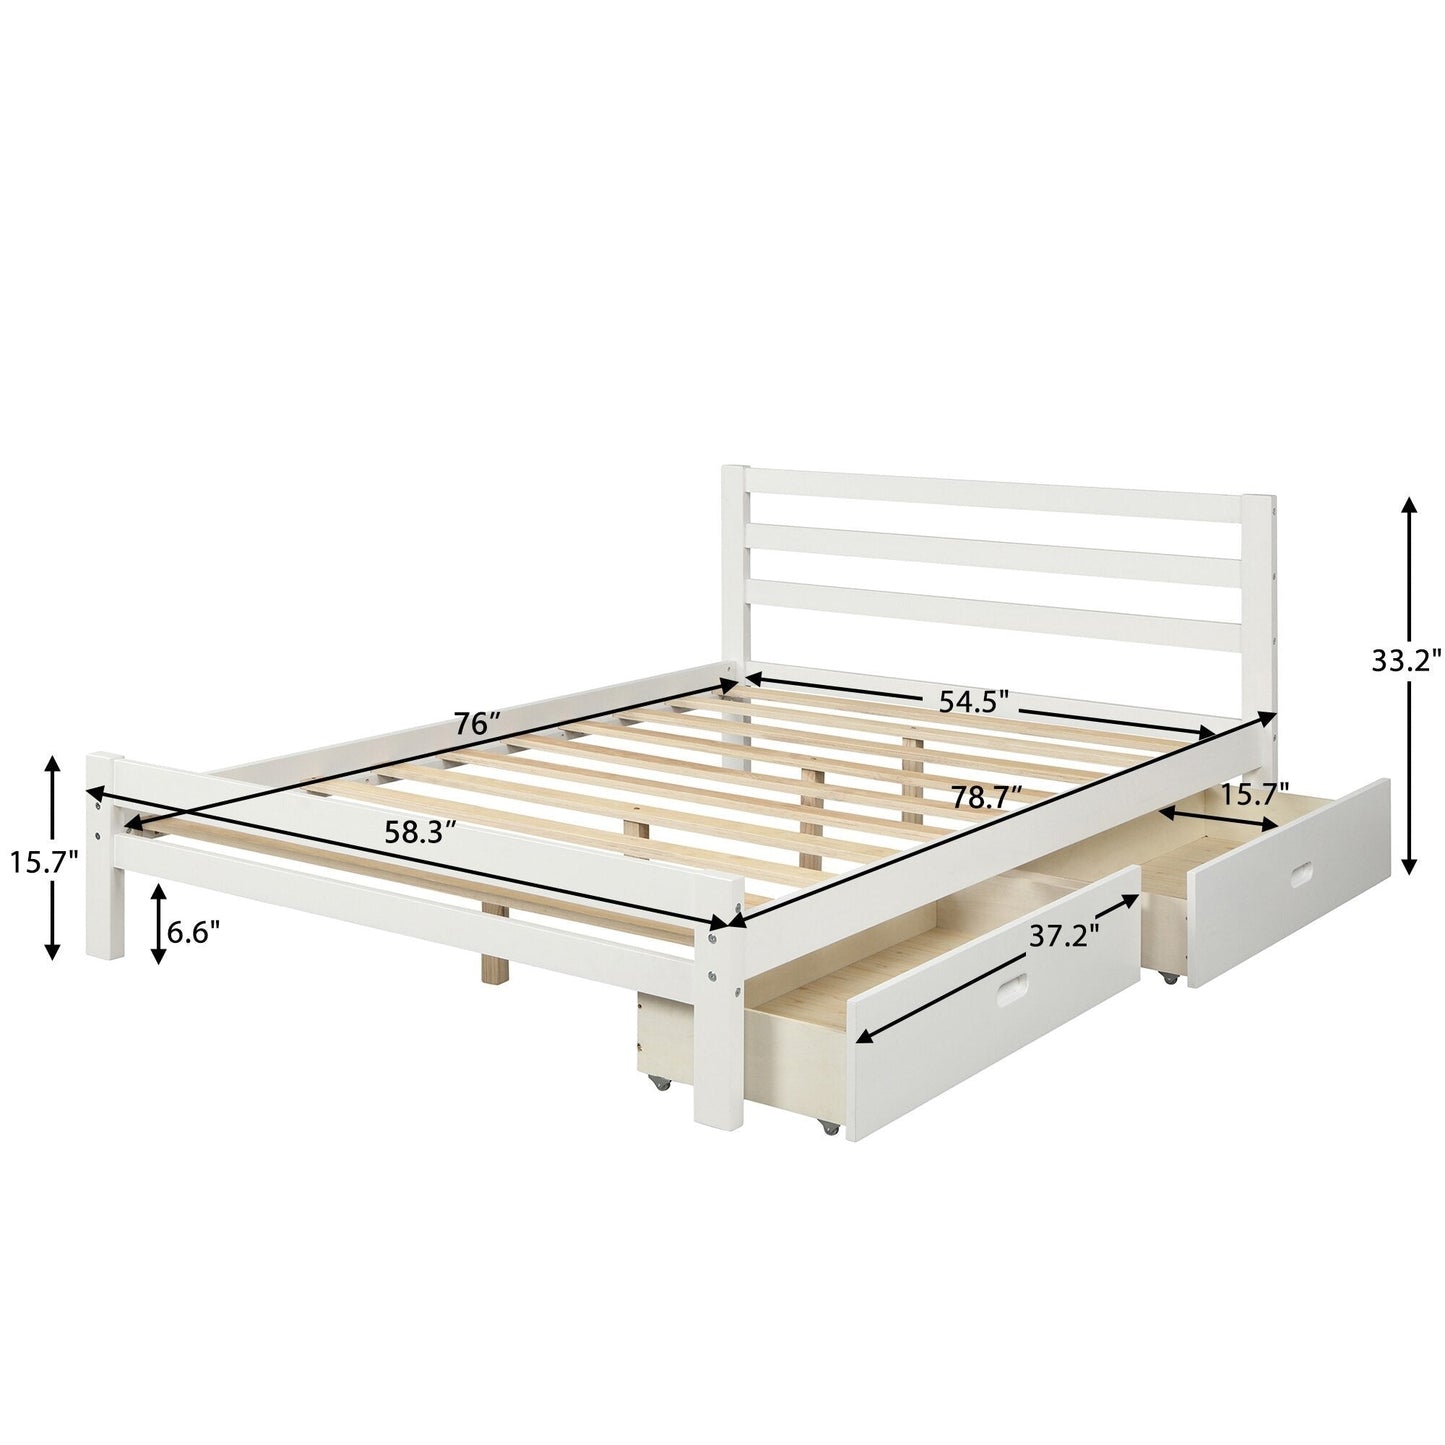 Wooden Bed With Two Drawers in full size